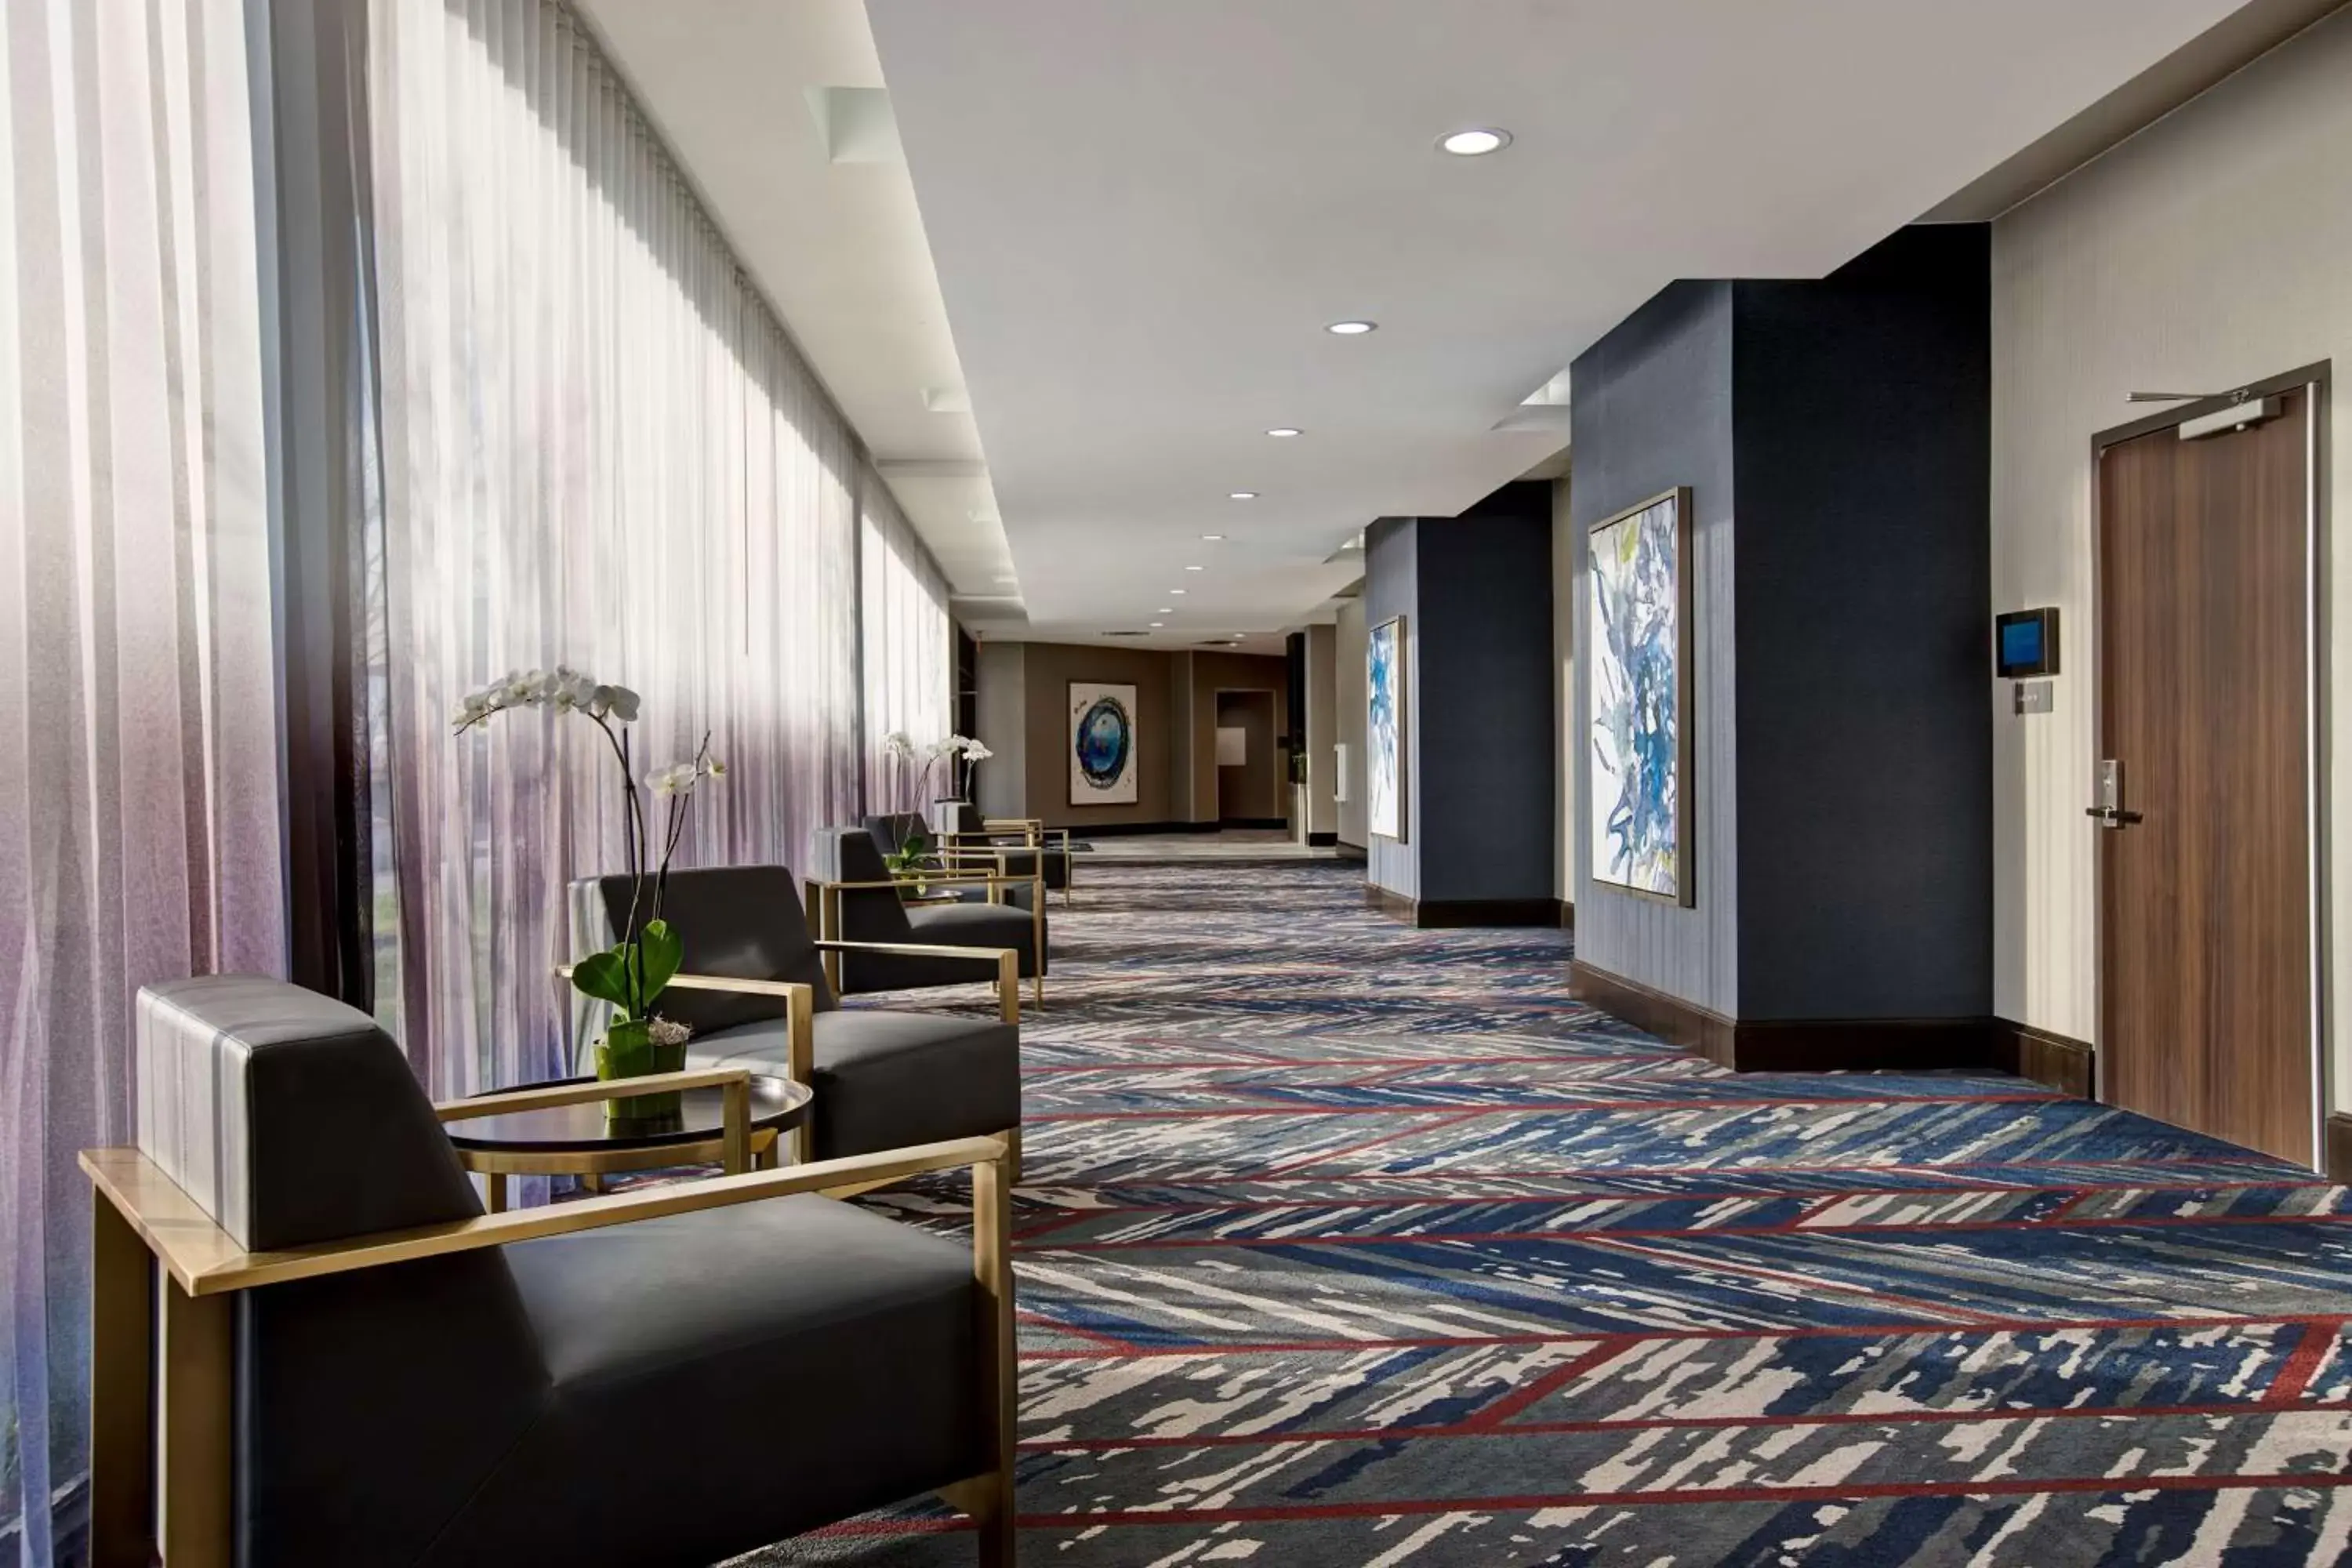 Meeting/conference room in Embassy Suites By Hilton Oklahoma City Northwest